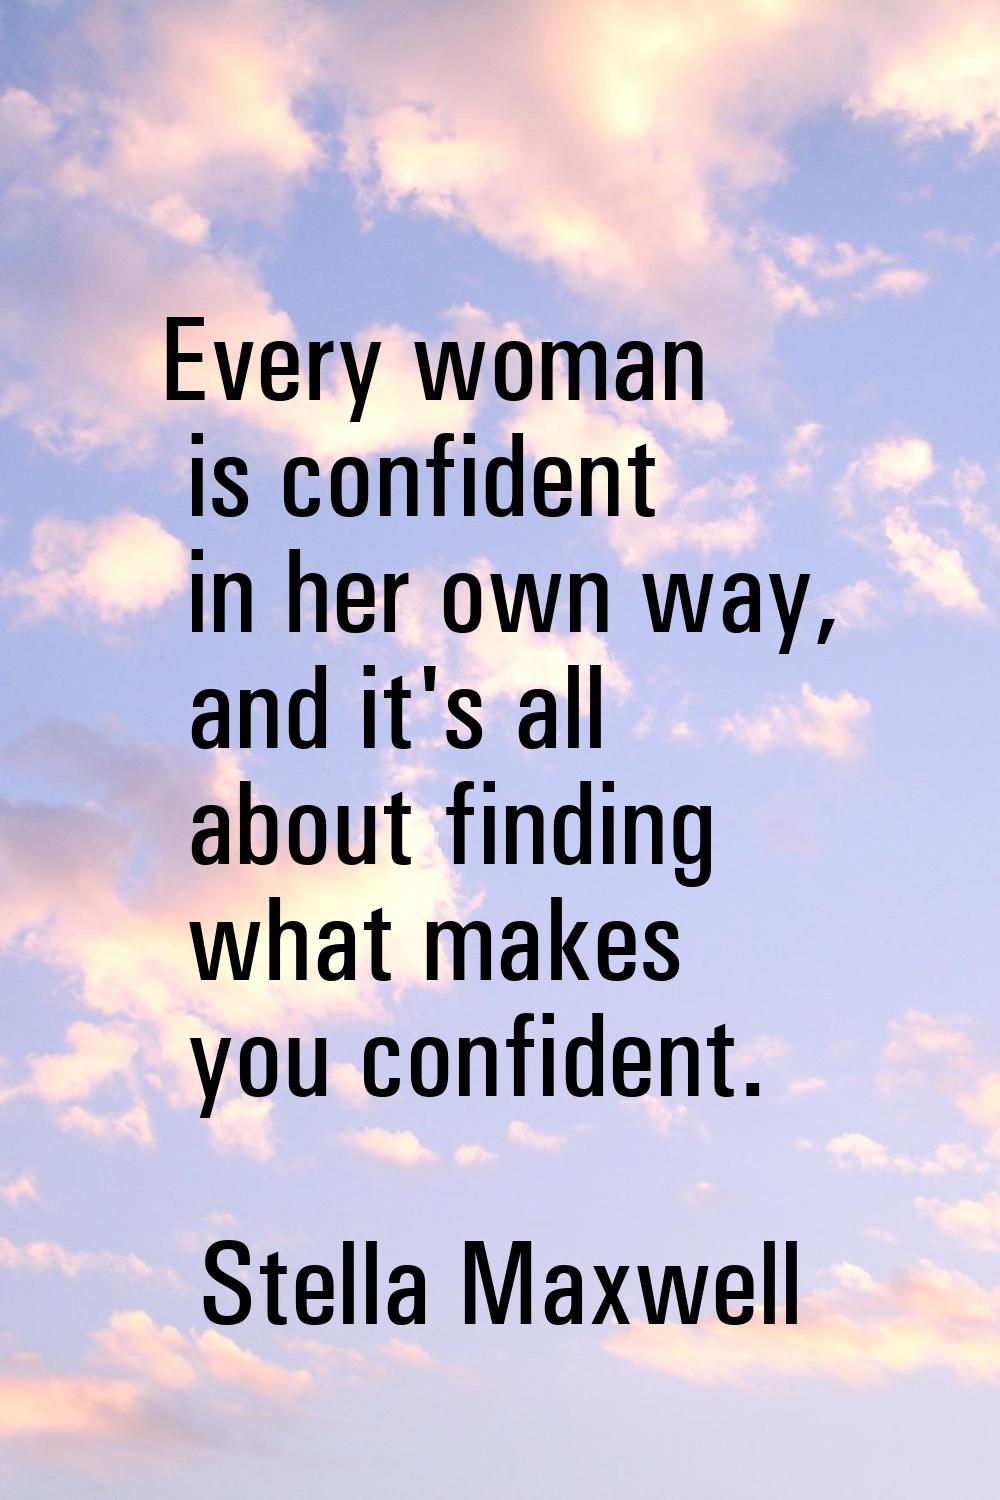 Every woman is confident in her own way, and it's all about finding what makes you confident.